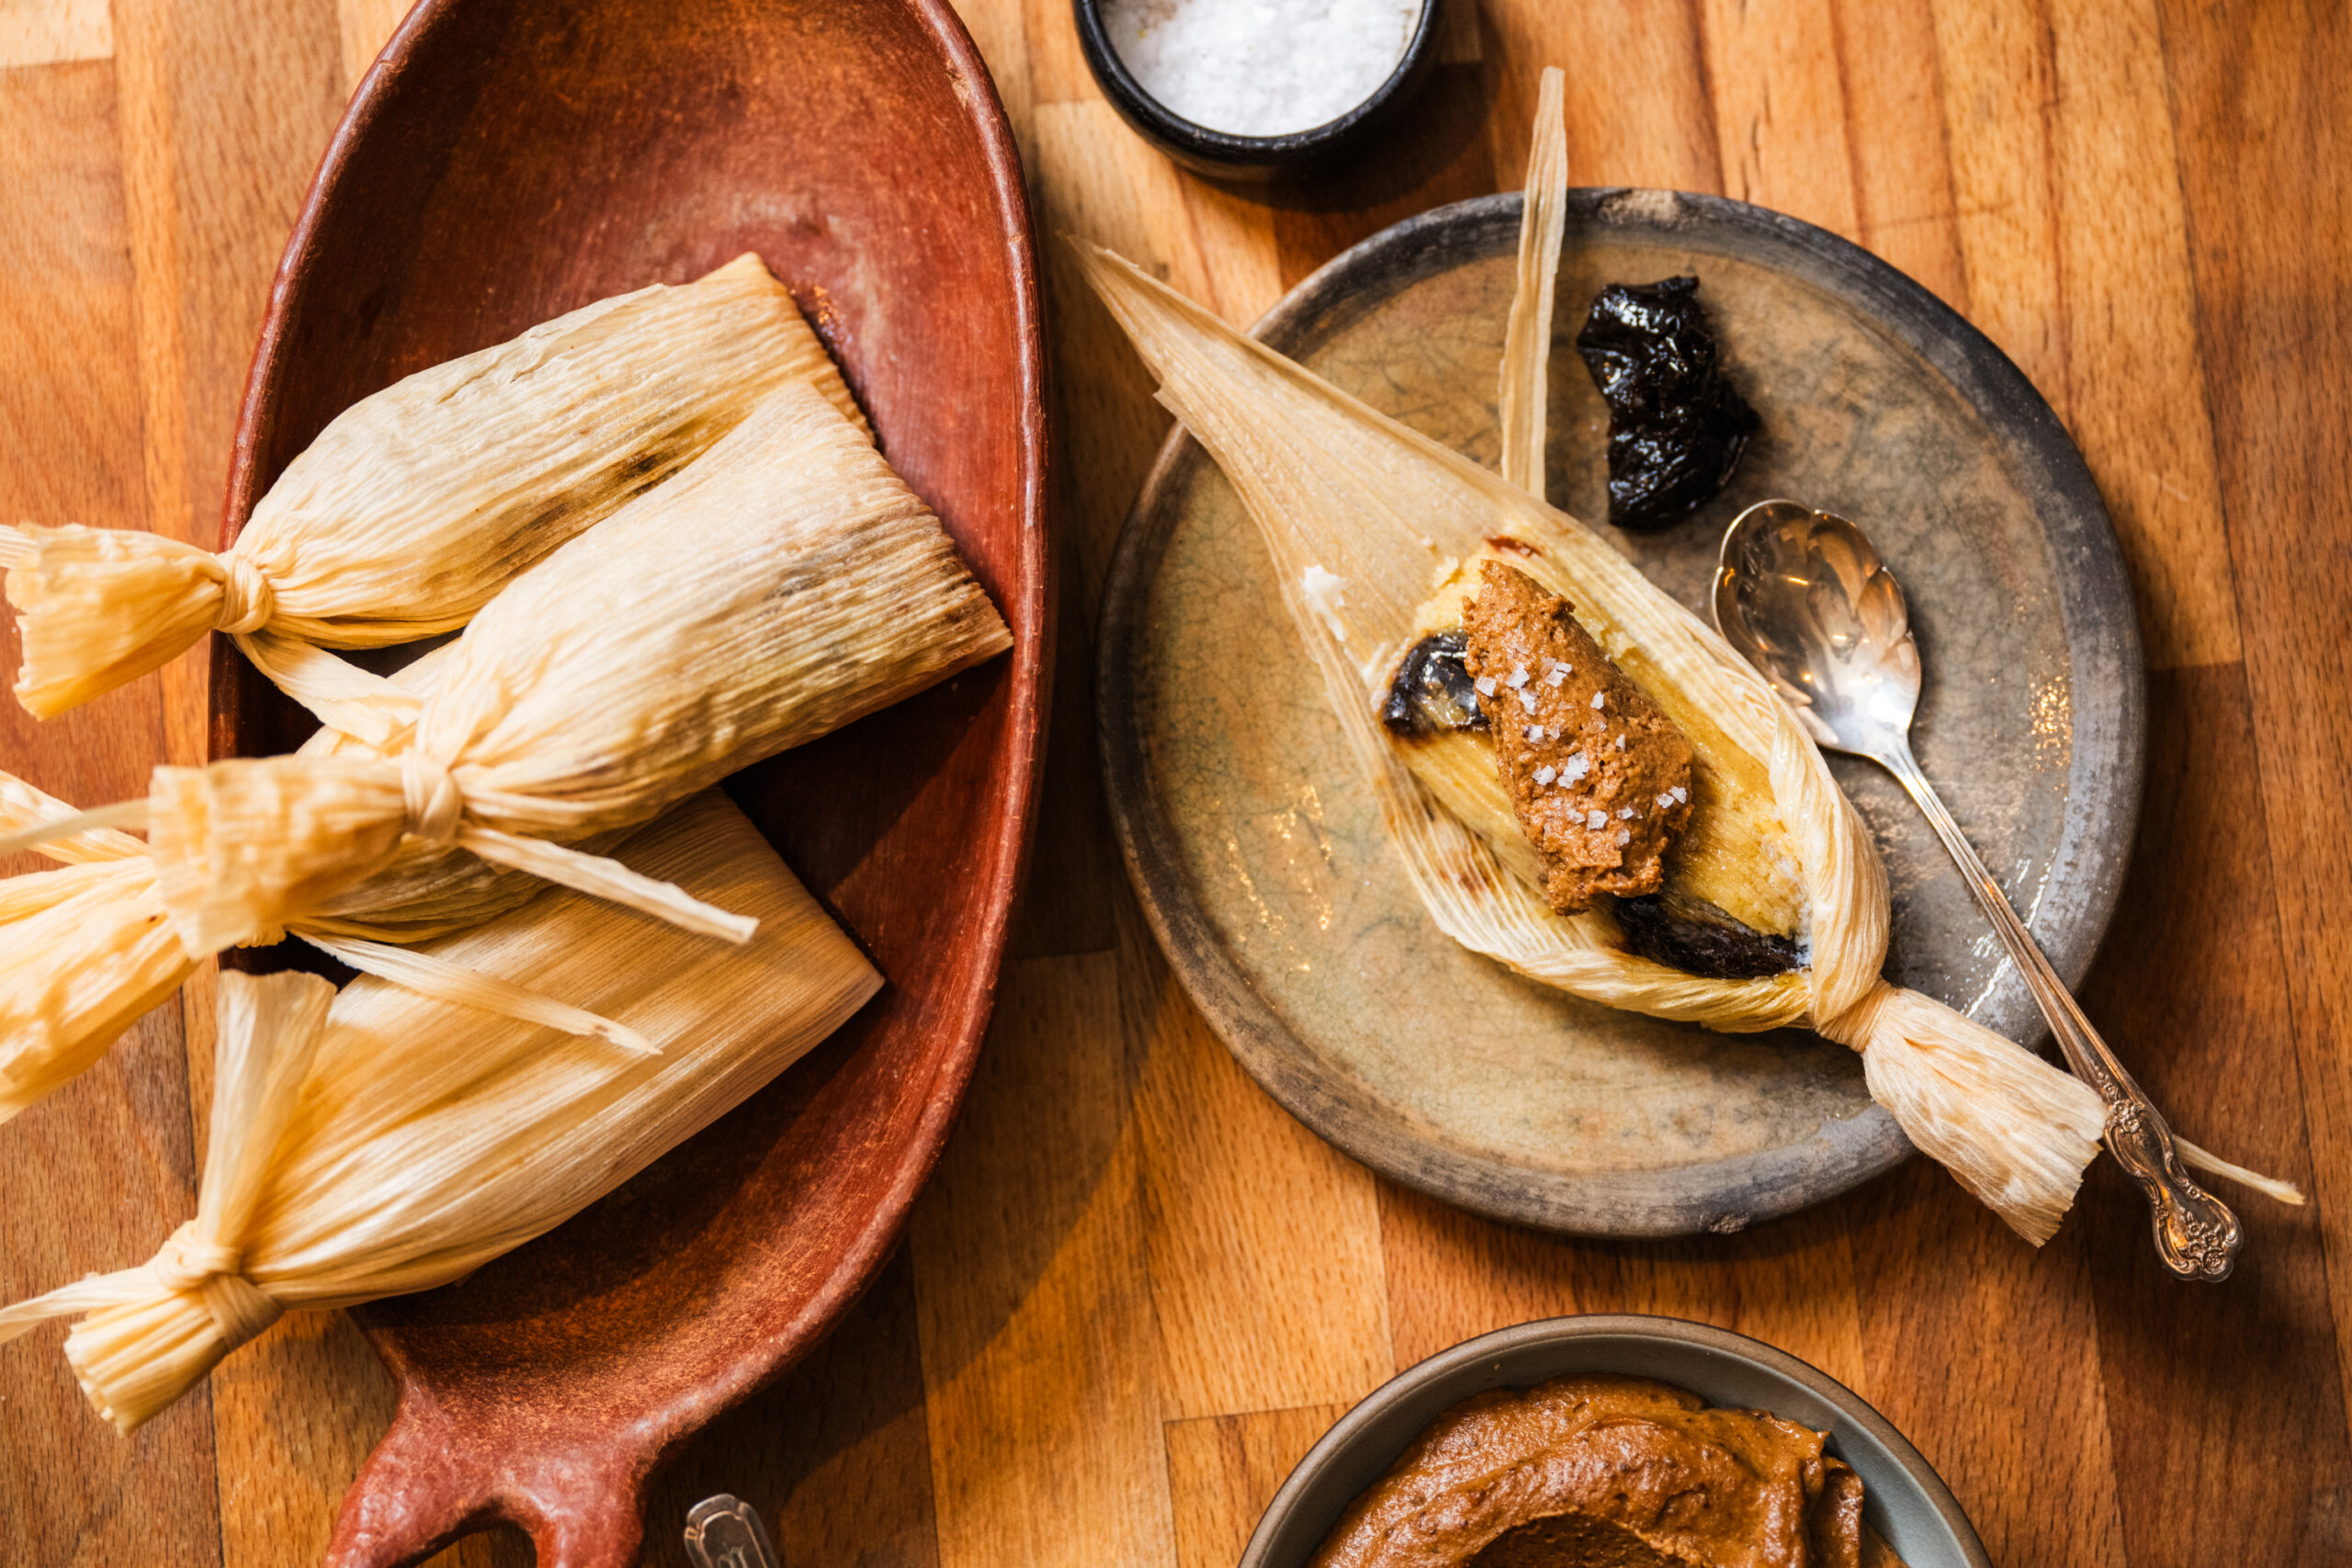 Prune and miso tamales from Chef Ana Castro